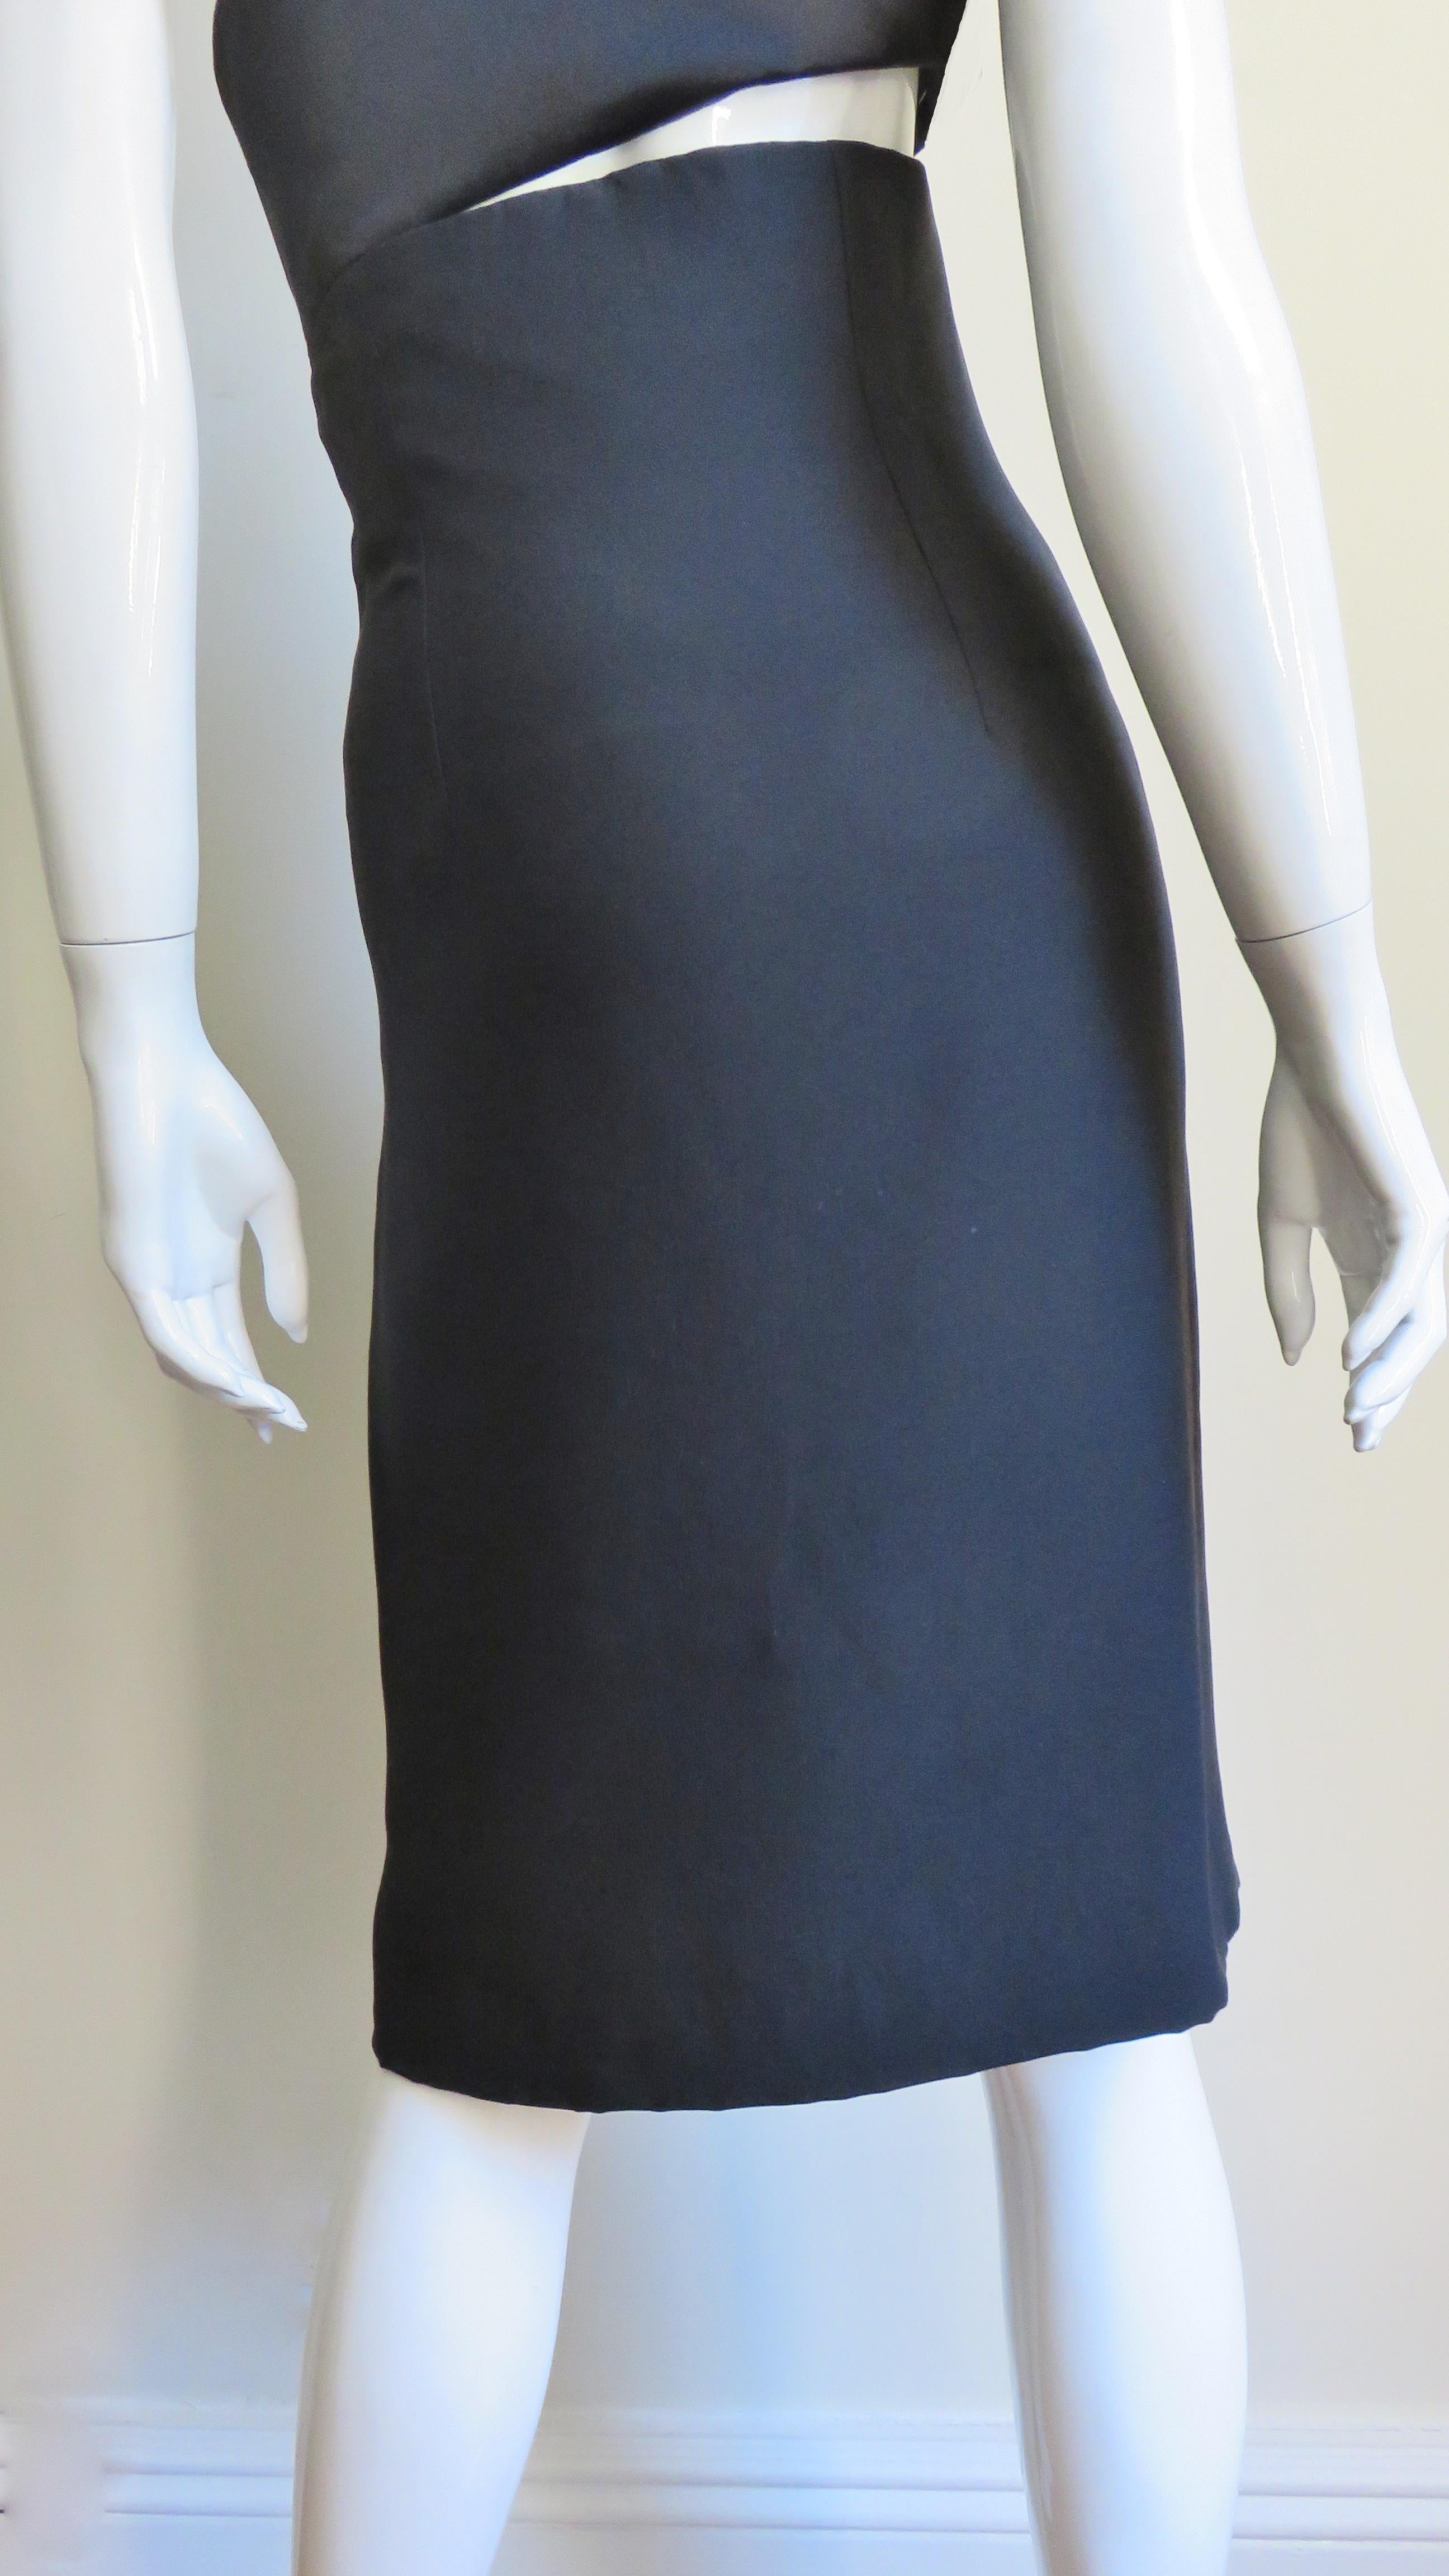 Gianni Versace One Shoulder Dress with Cut out For Sale 4